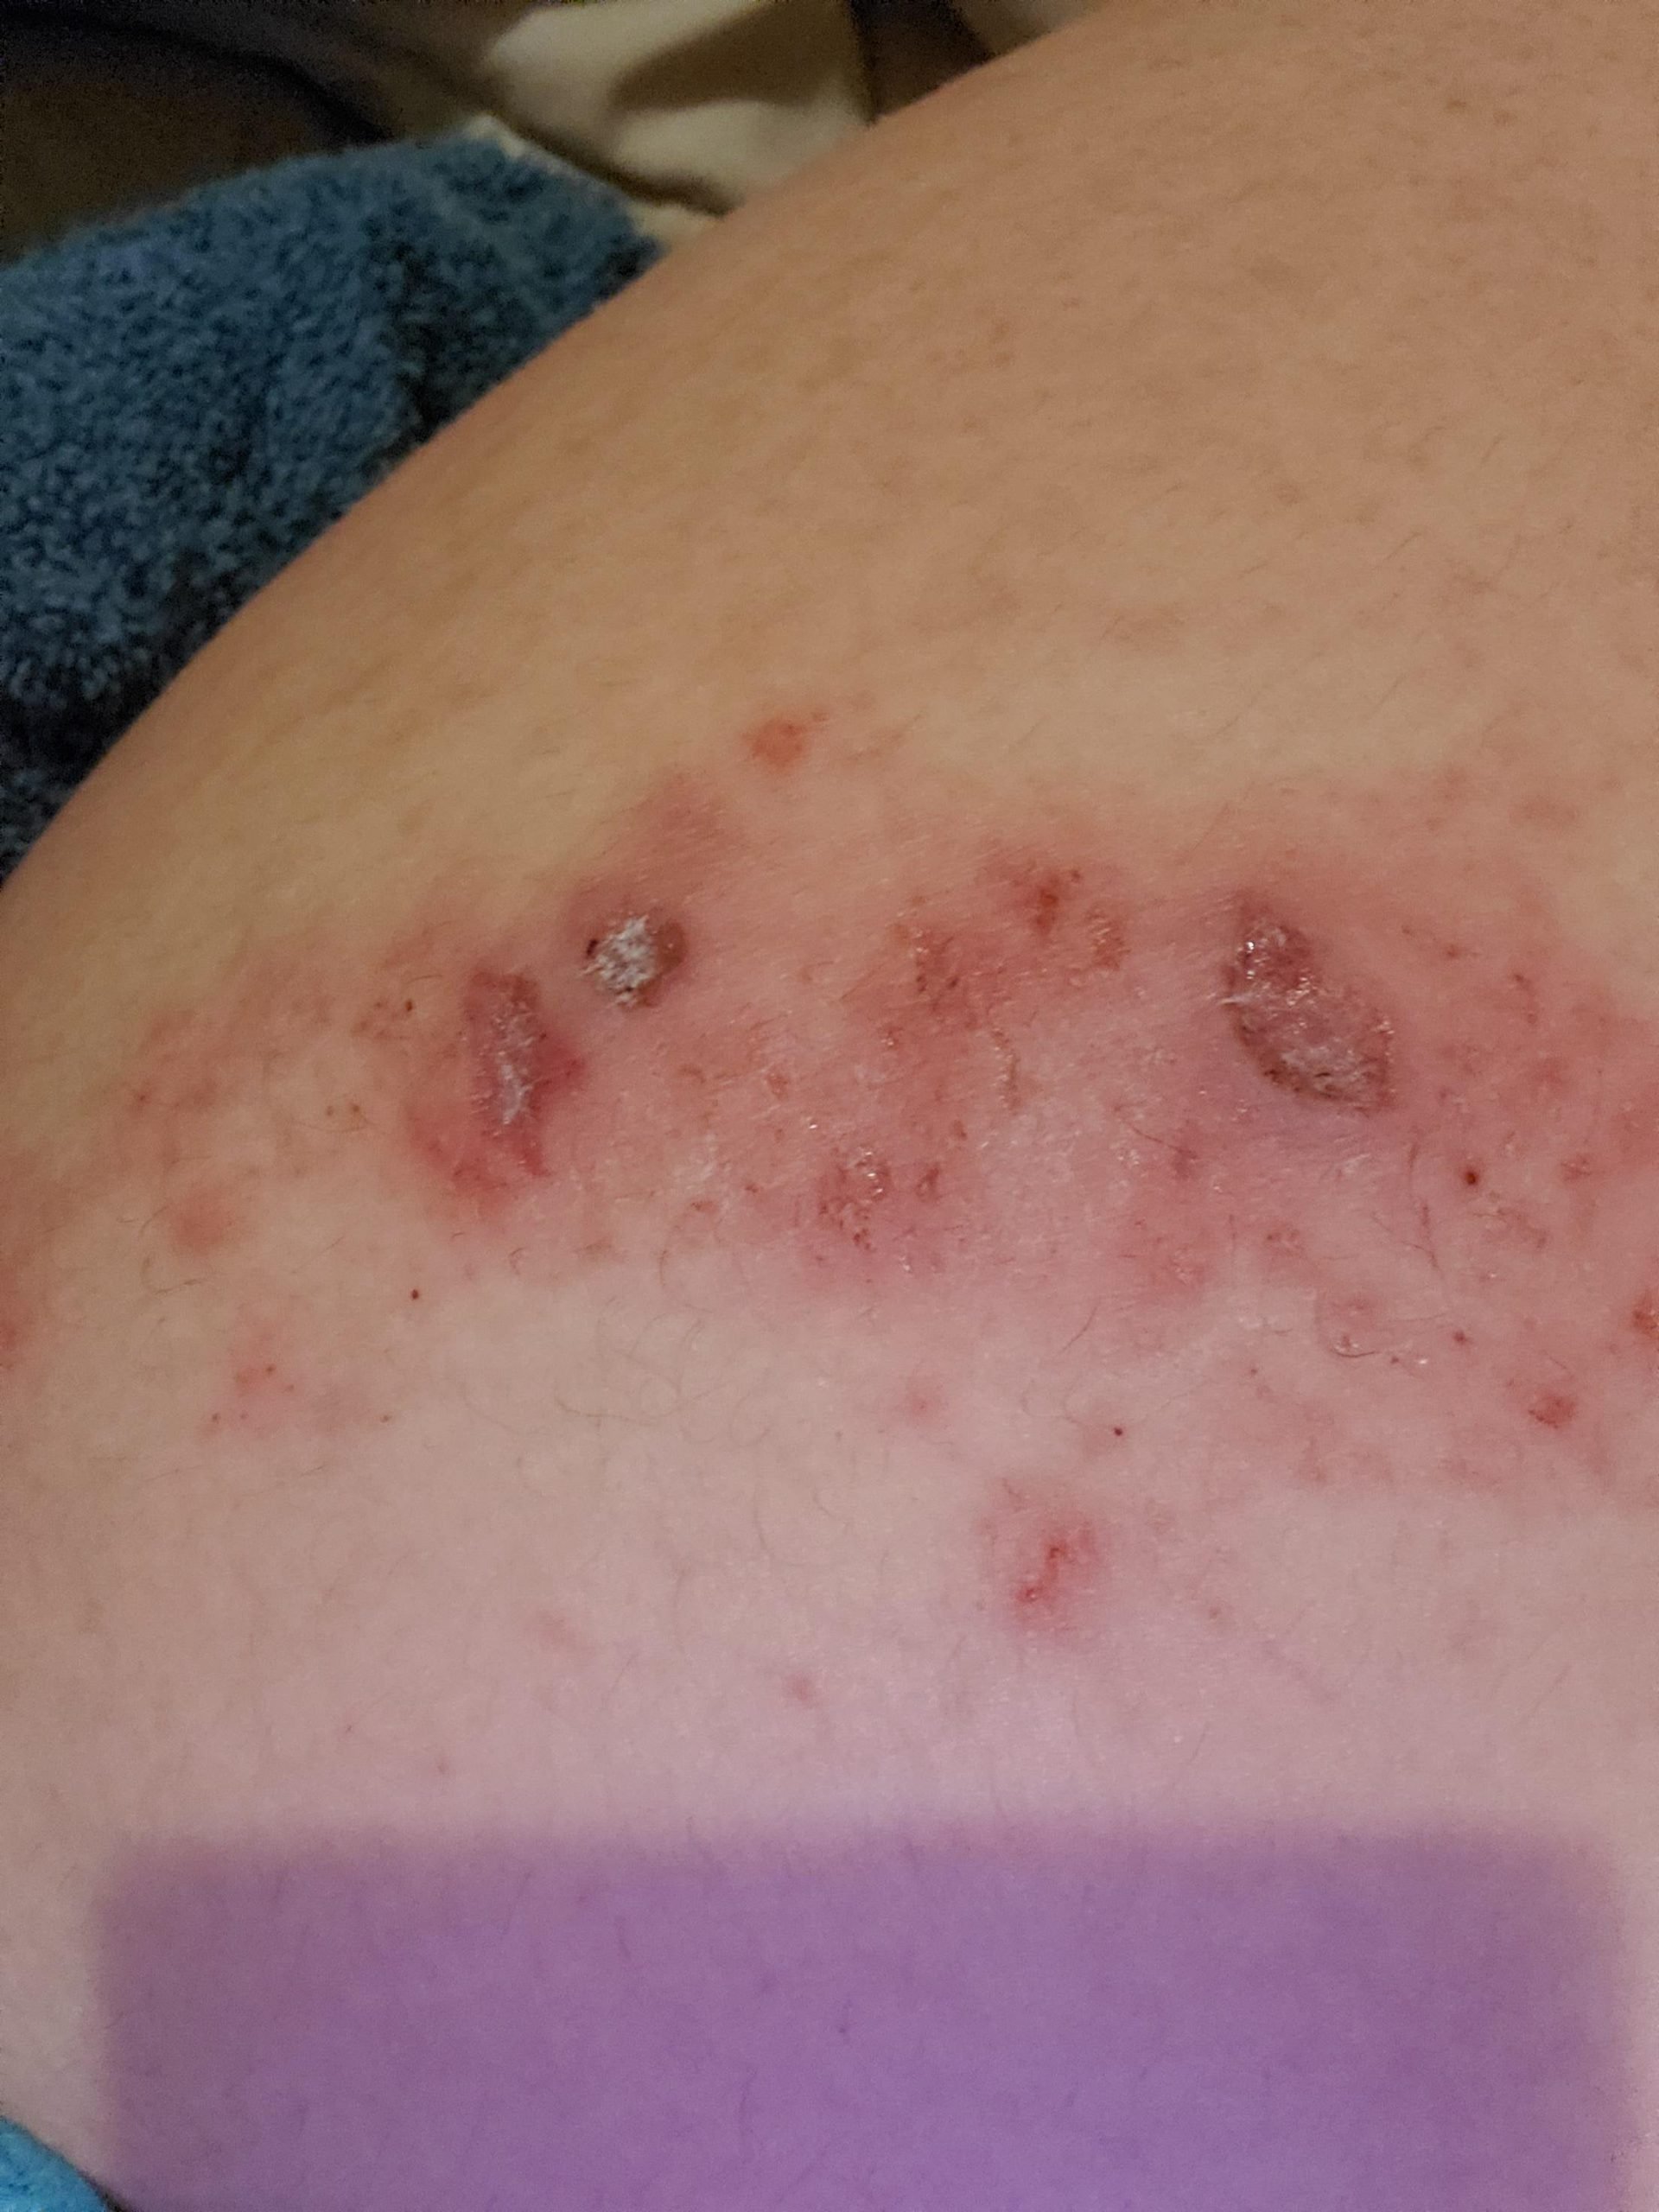 My (18 FtM) eczema is keeping me up at night ...